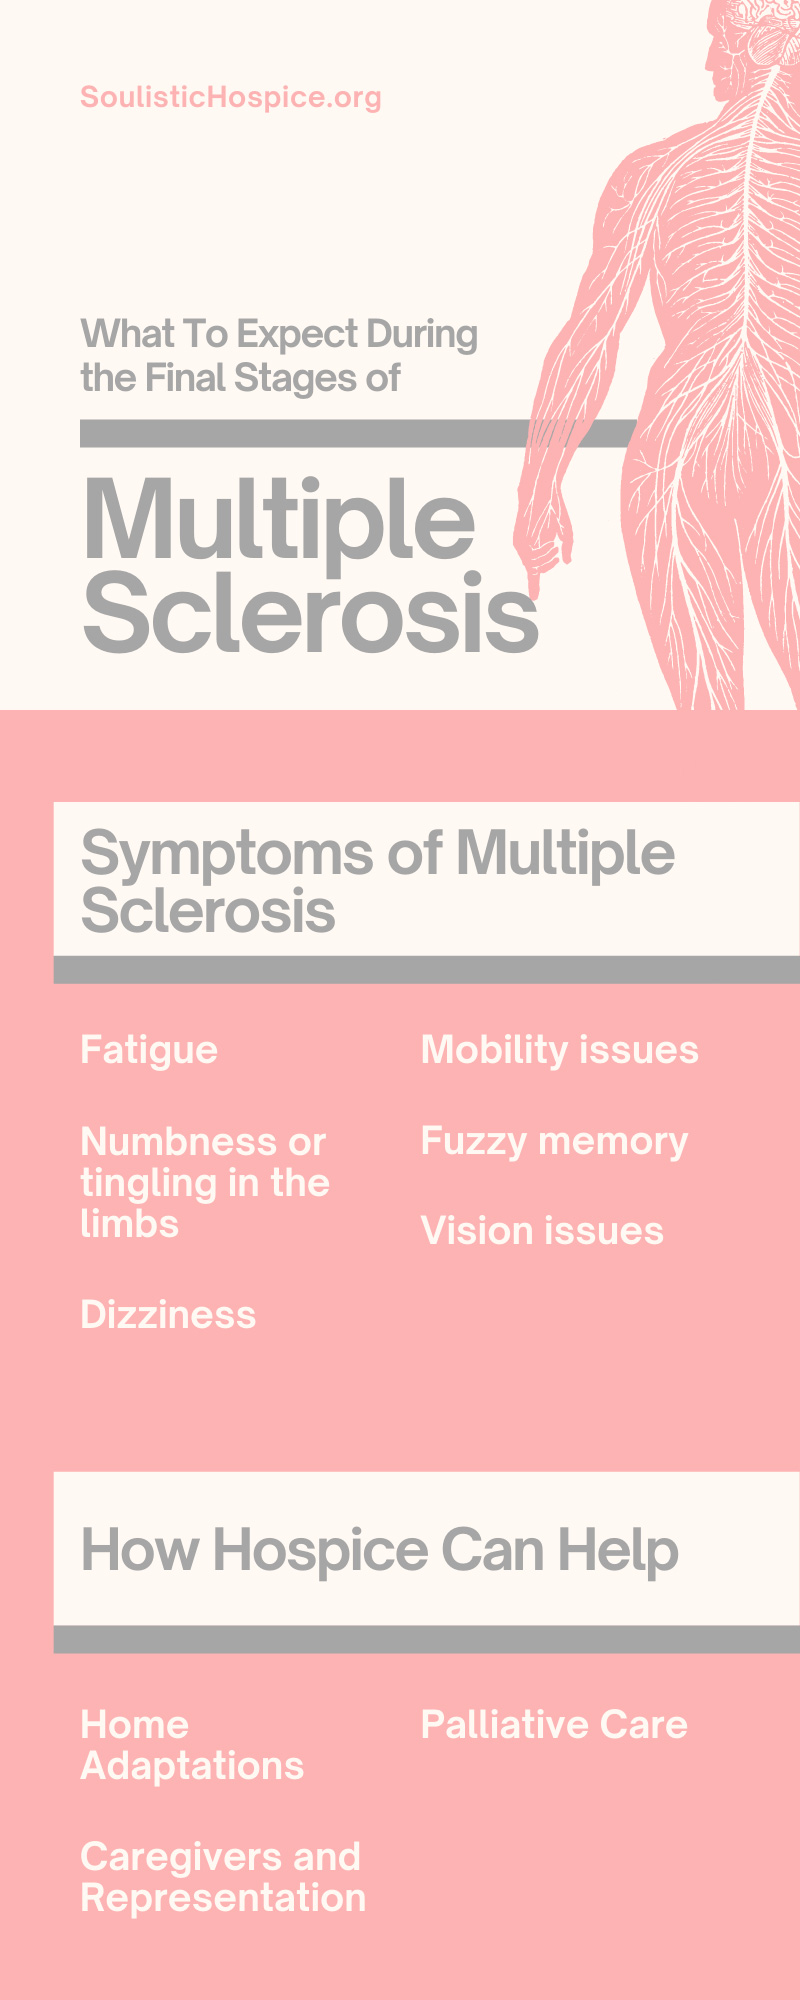 What To Expect During the Final Stages of Multiple Sclerosis